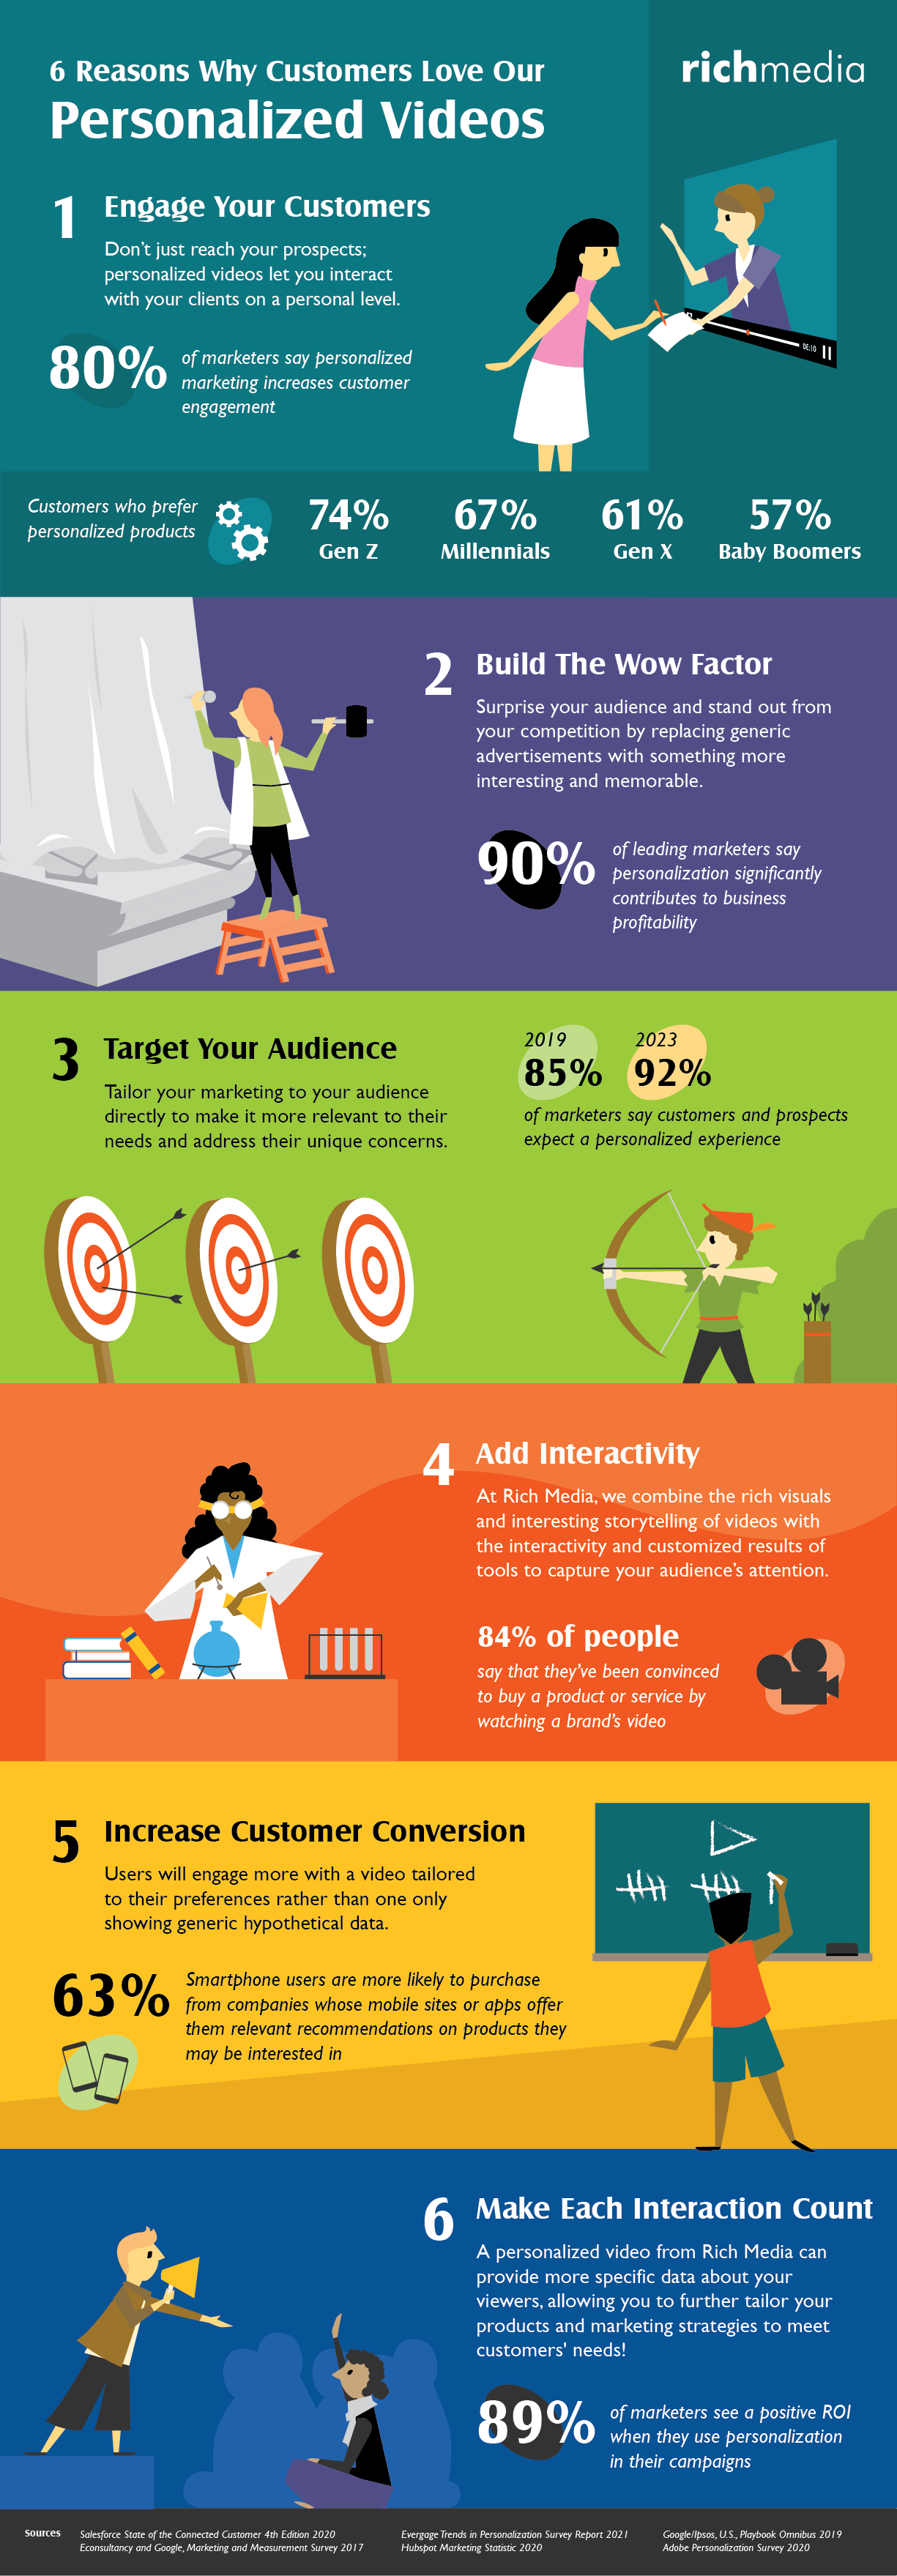 6 Reasons Why Customers Love Our Personalized Videos Infographic